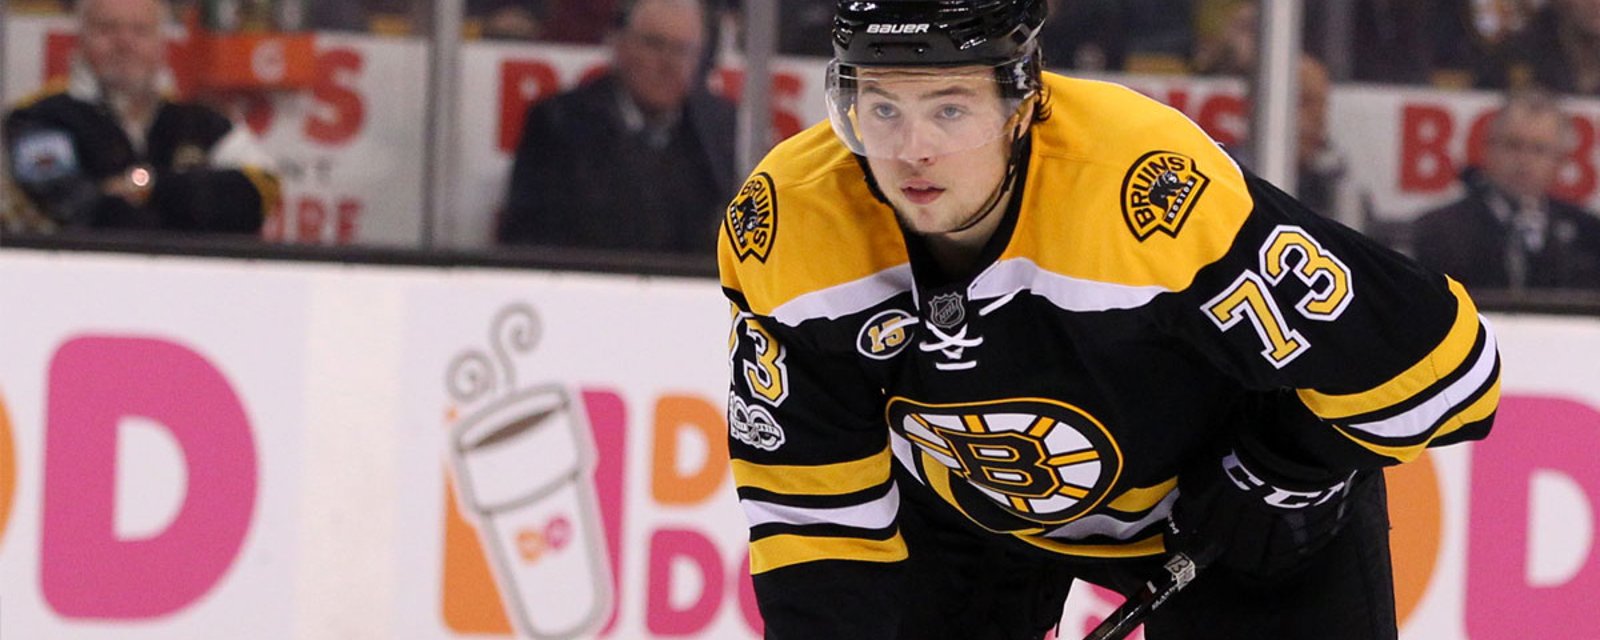 Charlie McAvoy, a leader for the Bruins’ youth movement